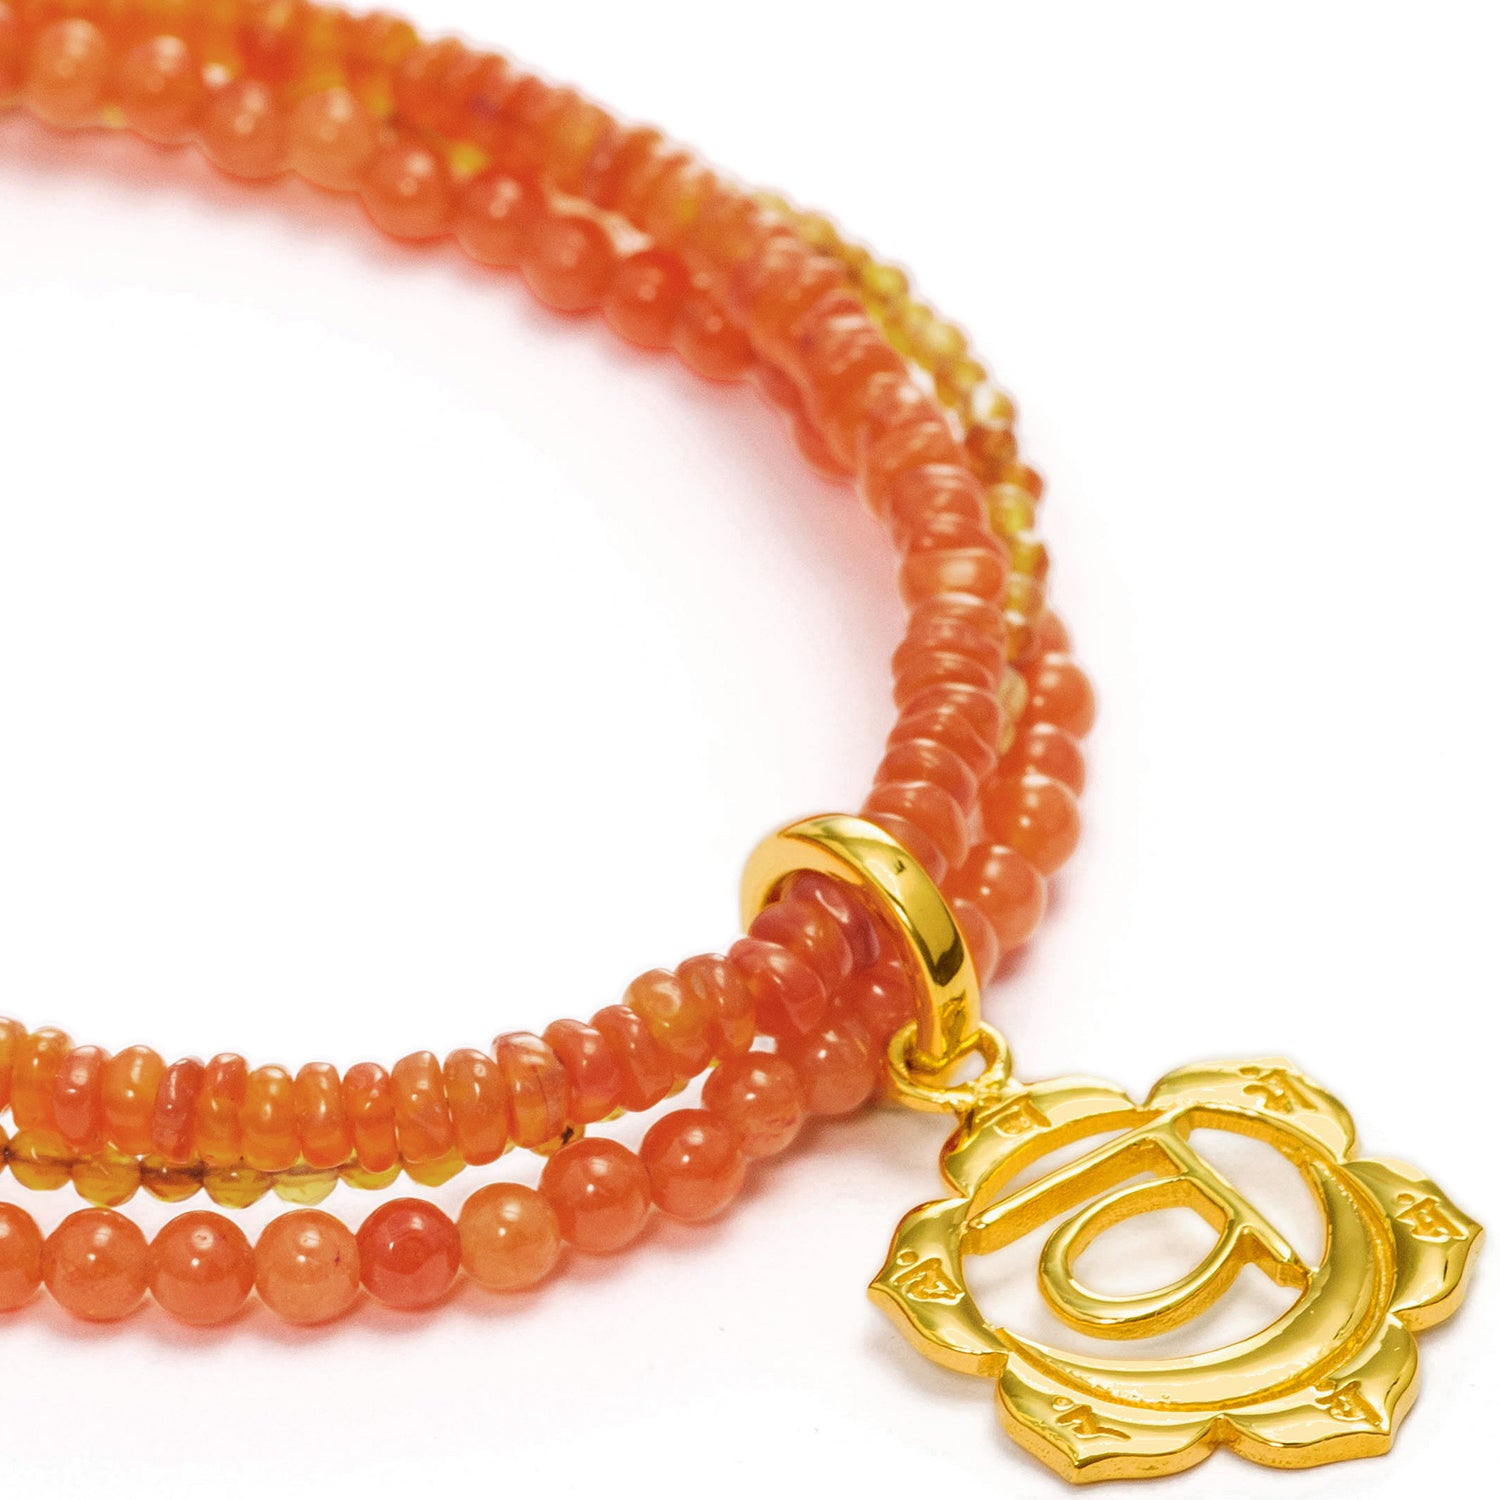 Sacral Chakra bracelet with gemstones gold-plated silver by ETERNAL BLISS - Spiritual Jewellery